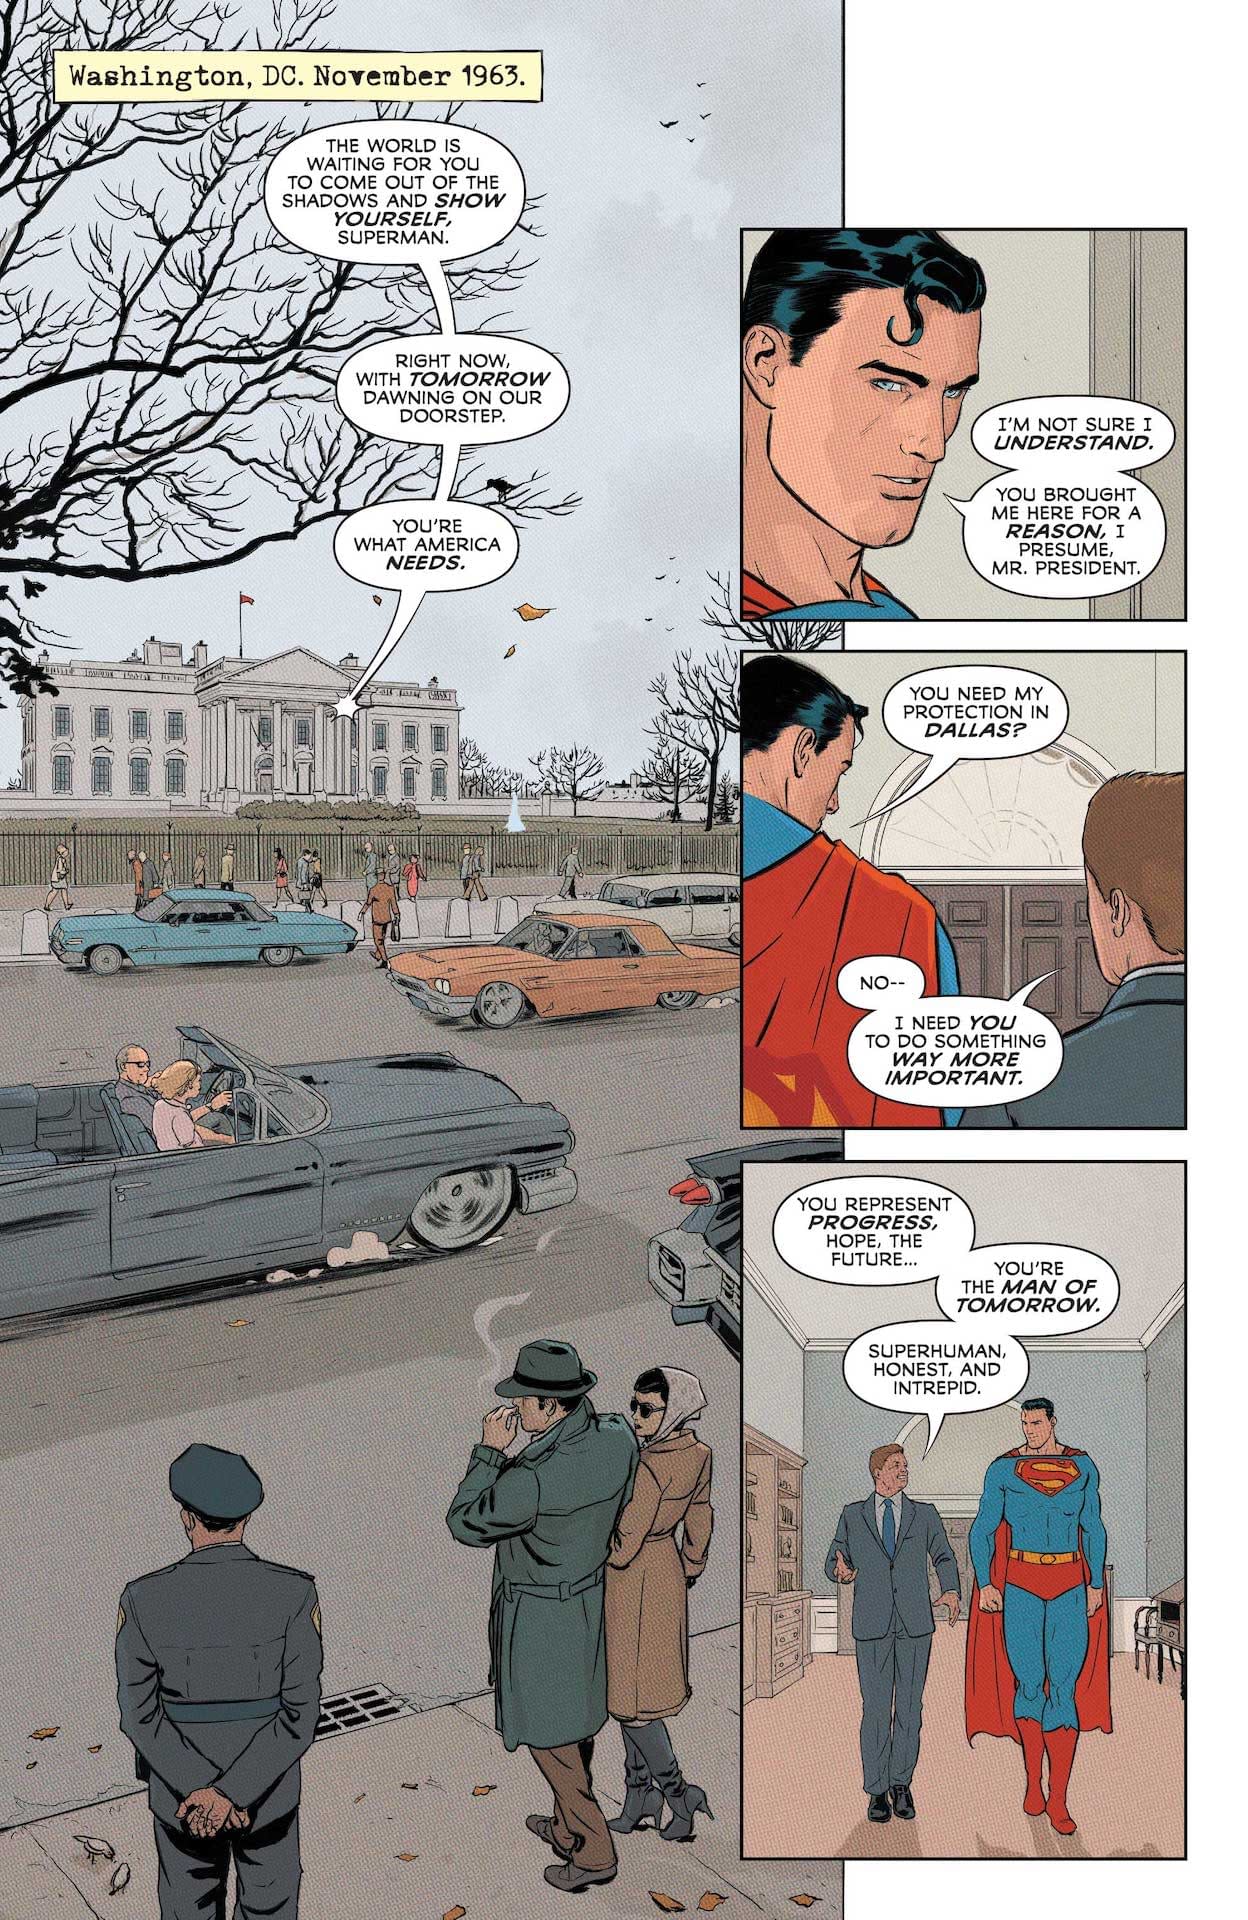 Interior preview page from SUPERMAN AND THE AUTHORITY #1 (OF 4) CVR A MIKEL JANIN